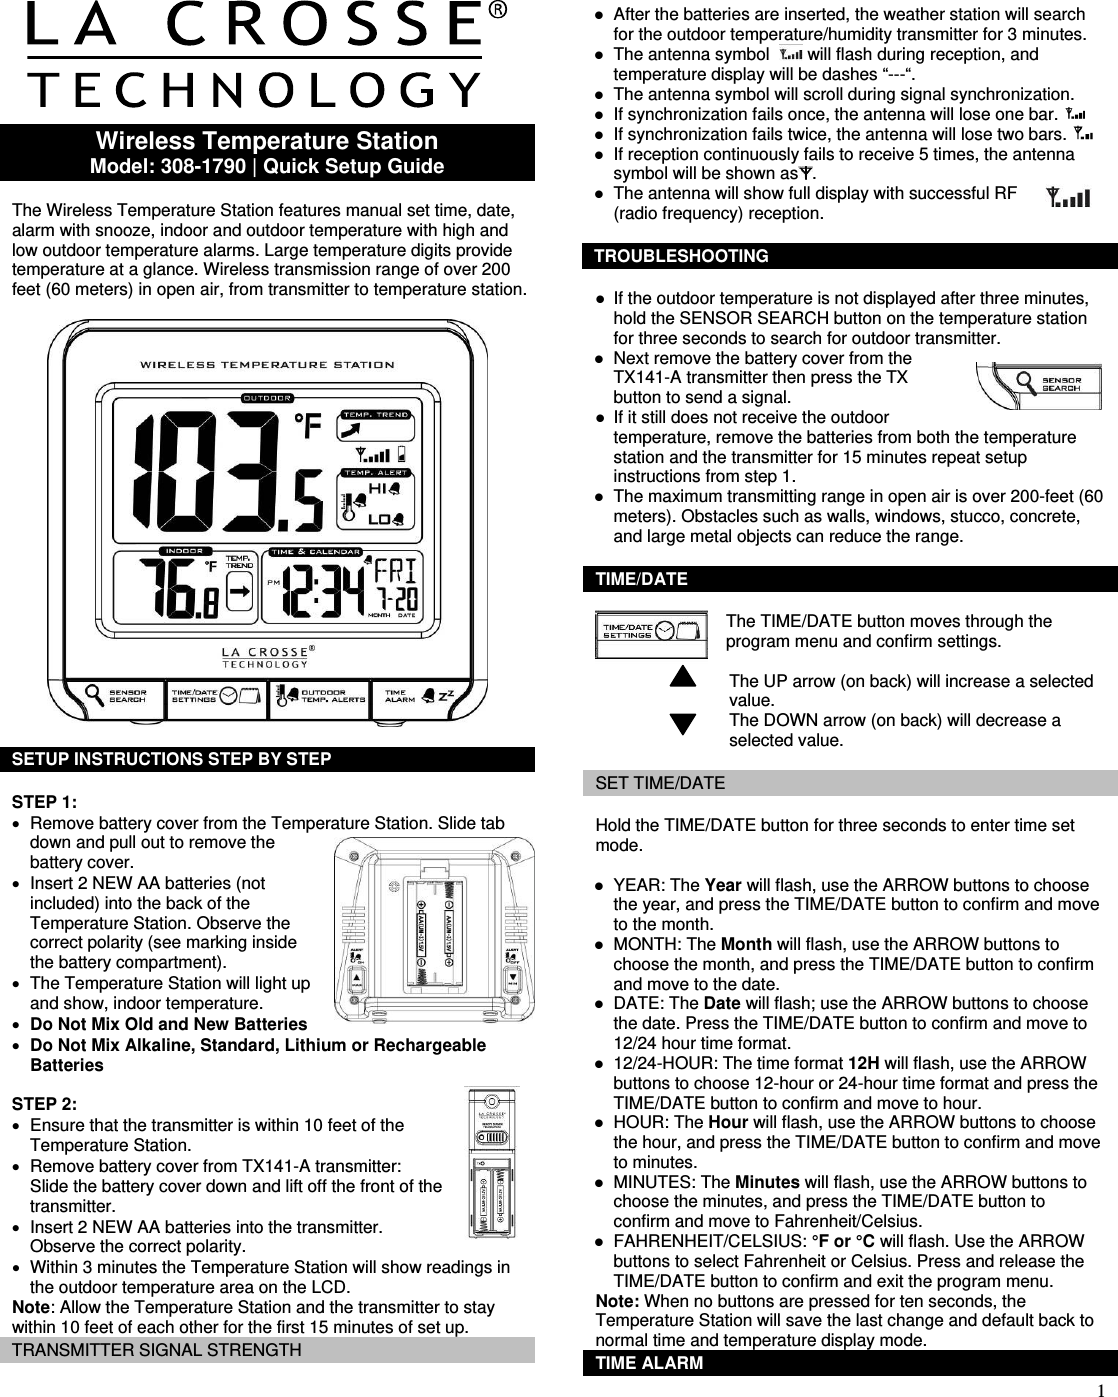  1     Wireless Temperature Station Model: 308-1790 | Quick Setup Guide  The Wireless Temperature Station features manual set time, date, alarm with snooze, indoor and outdoor temperature with high and low outdoor temperature alarms. Large temperature digits provide temperature at a glance. Wireless transmission range of over 200 feet (60 meters) in open air, from transmitter to temperature station.    SETUP INSTRUCTIONS STEP BY STEP   STEP 1: •  Remove battery cover from the Temperature Station. Slide tab down and pull out to remove the battery cover.  •  Insert 2 NEW AA batteries (not included) into the back of the Temperature Station. Observe the correct polarity (see marking inside the battery compartment).  •  The Temperature Station will light up and show, indoor temperature. • Do Not Mix Old and New Batteries • Do Not Mix Alkaline, Standard, Lithium or Rechargeable Batteries   STEP 2: •  Ensure that the transmitter is within 10 feet of the Temperature Station. •  Remove battery cover from TX141-A transmitter: Slide the battery cover down and lift off the front of the transmitter. •  Insert 2 NEW AA batteries into the transmitter. Observe the correct polarity. •  Within 3 minutes the Temperature Station will show readings in the outdoor temperature area on the LCD. Note: Allow the Temperature Station and the transmitter to stay within 10 feet of each other for the first 15 minutes of set up.  TRANSMITTER SIGNAL STRENGTH  z After the batteries are inserted, the weather station will search for the outdoor temperature/humidity transmitter for 3 minutes. z The antenna symbol    will flash during reception, and temperature display will be dashes “---“. z The antenna symbol will scroll during signal synchronization. z If synchronization fails once, the antenna will lose one bar.   z If synchronization fails twice, the antenna will lose two bars.   z If reception continuously fails to receive 5 times, the antenna symbol will be shown as .  z The antenna will show full display with successful RF (radio frequency) reception.   TROUBLESHOOTING  z If the outdoor temperature is not displayed after three minutes, hold the SENSOR SEARCH button on the temperature station for three seconds to search for outdoor transmitter.  z Next remove the battery cover from the TX141-A transmitter then press the TX button to send a signal. z If it still does not receive the outdoor temperature, remove the batteries from both the temperature station and the transmitter for 15 minutes repeat setup instructions from step 1.  z The maximum transmitting range in open air is over 200-feet (60  meters). Obstacles such as walls, windows, stucco, concrete, and large metal objects can reduce the range.  TIME/DATE  The TIME/DATE button moves through the program menu and confirm settings.                               The UP arrow (on back) will increase a selected                               value.                             The DOWN arrow (on back) will decrease a                              selected value.  SET TIME/DATE  Hold the TIME/DATE button for three seconds to enter time set mode.  z YEAR: The Year will flash, use the ARROW buttons to choose the year, and press the TIME/DATE button to confirm and move to the month. z MONTH: The Month will flash, use the ARROW buttons to choose the month, and press the TIME/DATE button to confirm and move to the date. z DATE: The Date will flash; use the ARROW buttons to choose the date. Press the TIME/DATE button to confirm and move to 12/24 hour time format. z 12/24-HOUR: The time format 12H will flash, use the ARROW buttons to choose 12-hour or 24-hour time format and press the TIME/DATE button to confirm and move to hour. z HOUR: The Hour will flash, use the ARROW buttons to choose the hour, and press the TIME/DATE button to confirm and move to minutes. z MINUTES: The Minutes will flash, use the ARROW buttons to choose the minutes, and press the TIME/DATE button to confirm and move to Fahrenheit/Celsius. z FAHRENHEIT/CELSIUS: °F or °C will flash. Use the ARROW buttons to select Fahrenheit or Celsius. Press and release the TIME/DATE button to confirm and exit the program menu. Note: When no buttons are pressed for ten seconds, the Temperature Station will save the last change and default back to normal time and temperature display mode. TIME ALARM 